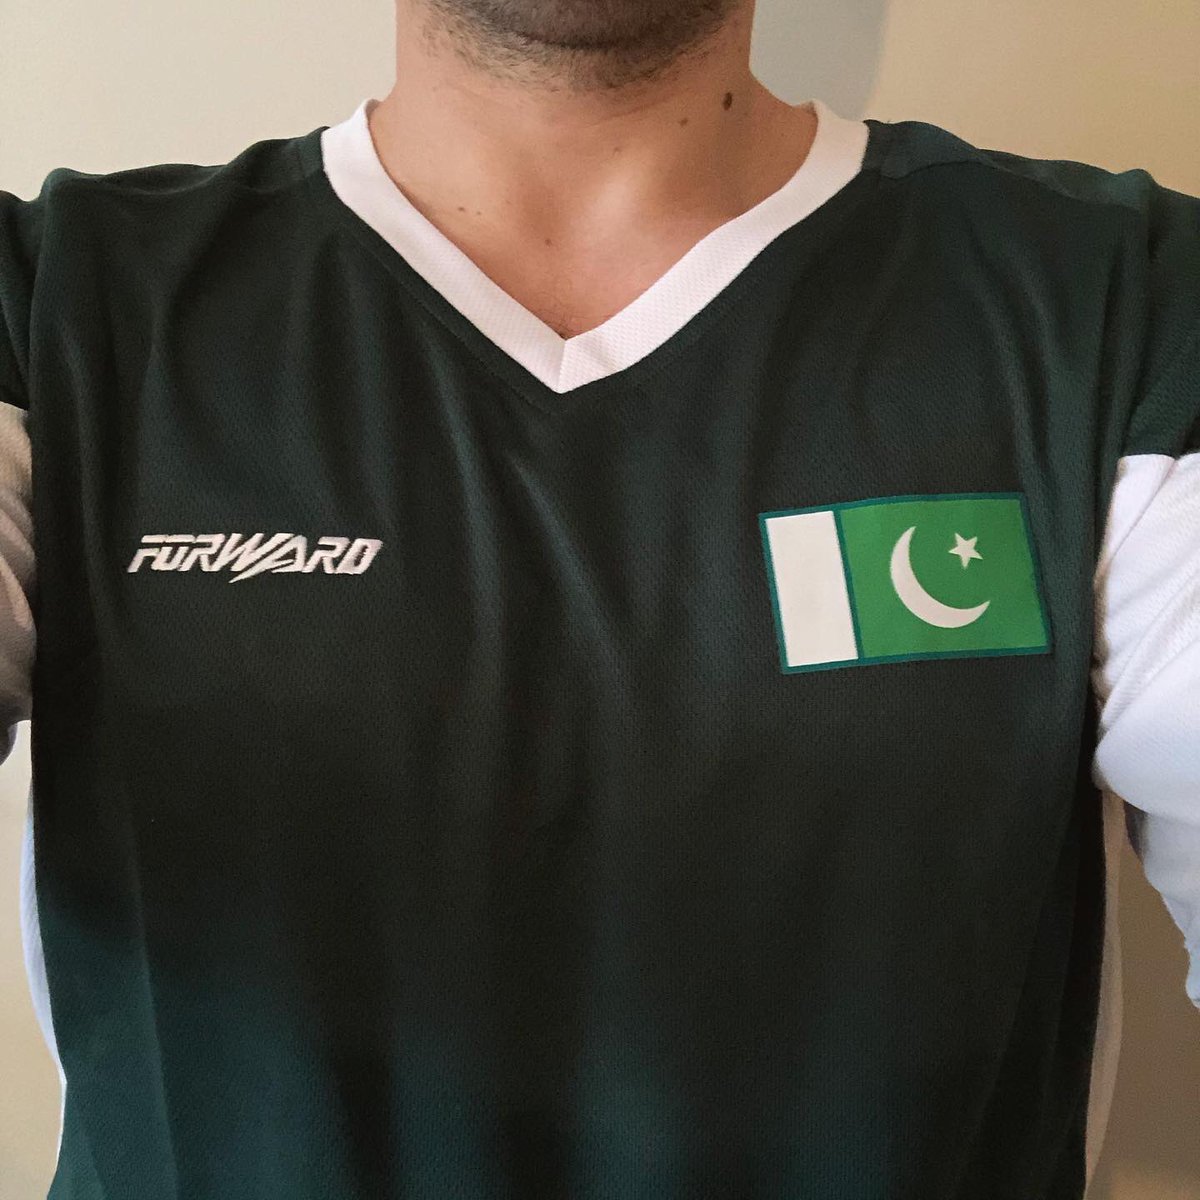 . @PakistanFFHome Kit, 2014ForwardI know it sounds silly, but we gotta try and keep a positive attitude these days. All we can do - at least most of us - is wait, and be patient.This was my work attire yesterday, totally random, like the situation we’re in.